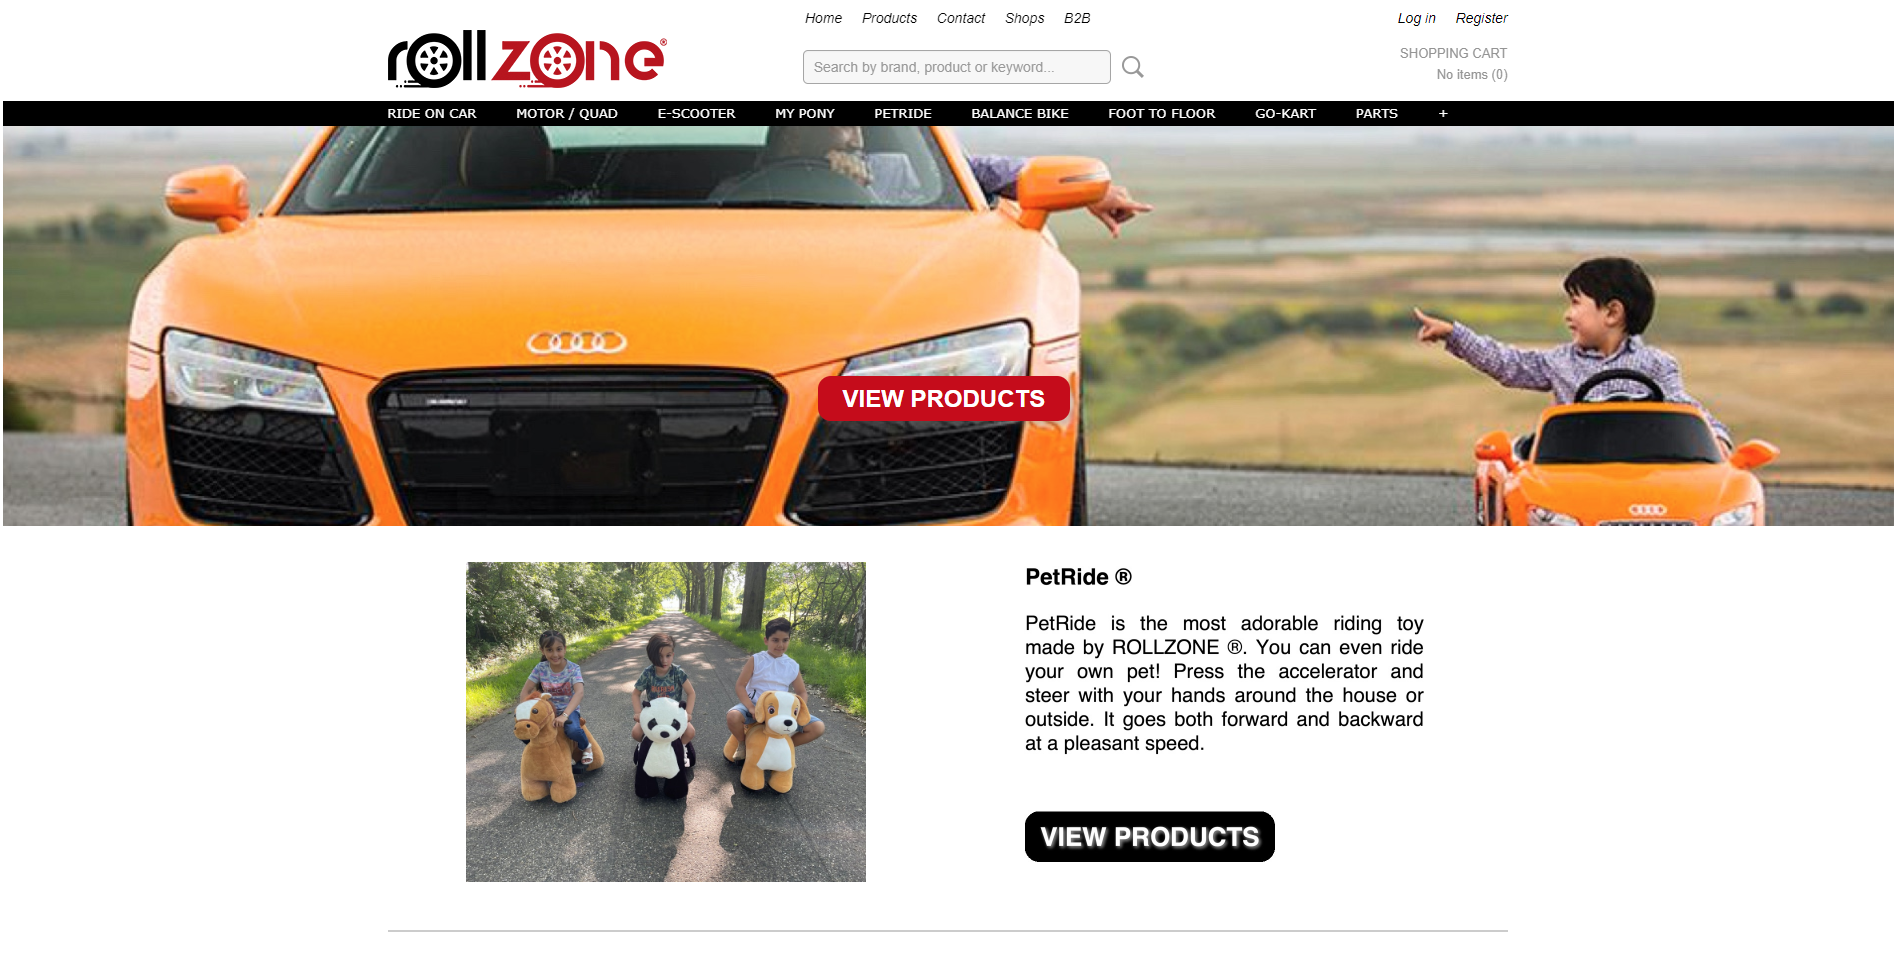 RollZone Dropshipping Suppliers